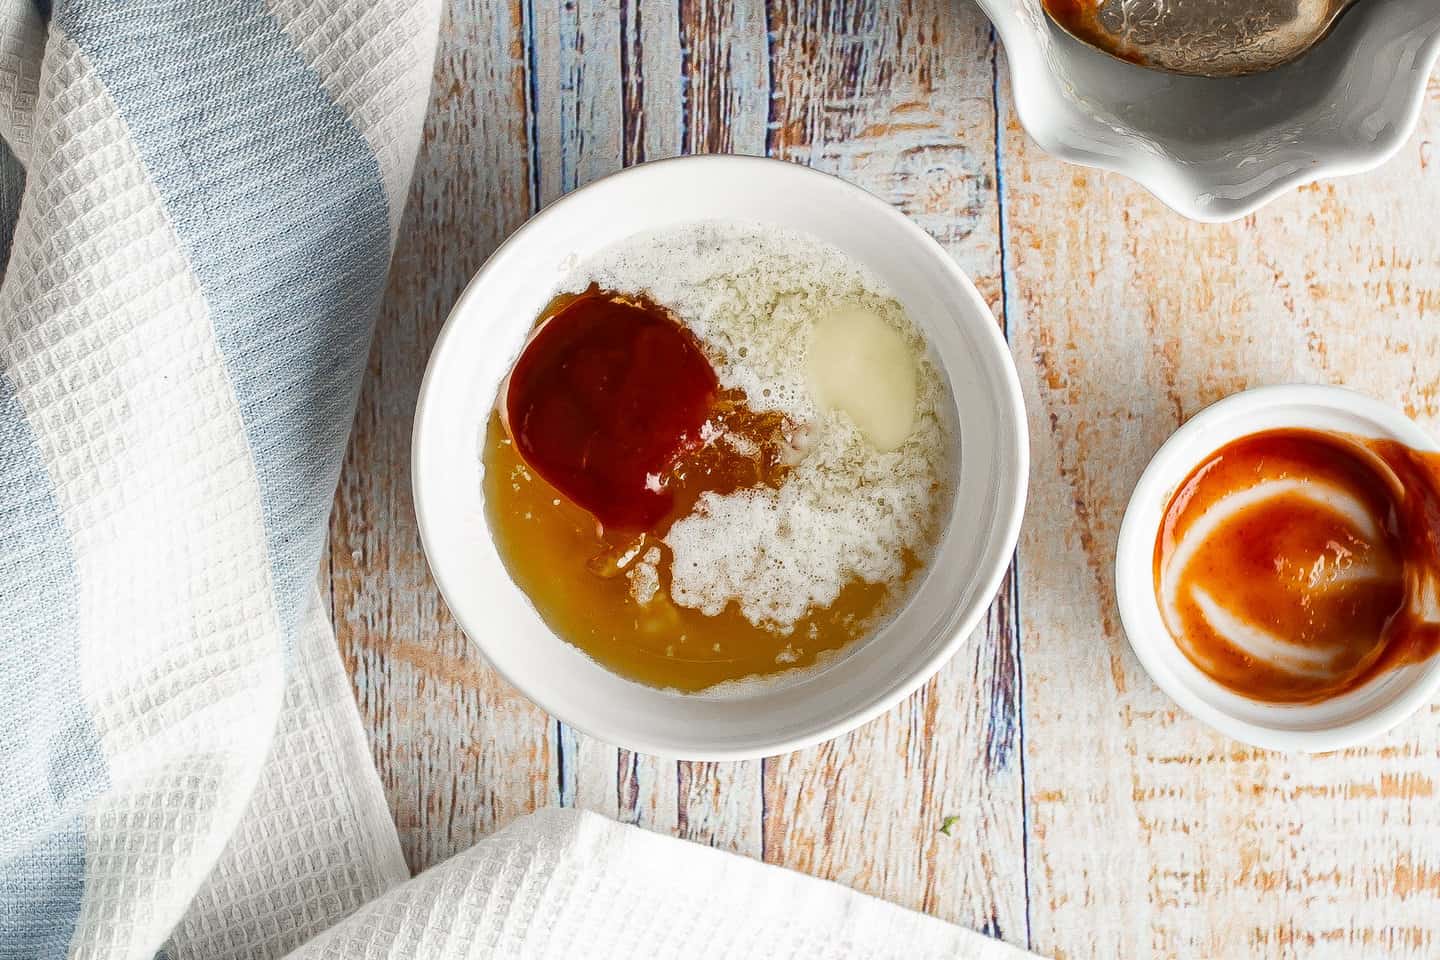 Melted butter, orange marmalade and sriracha sauce in a small bowl.